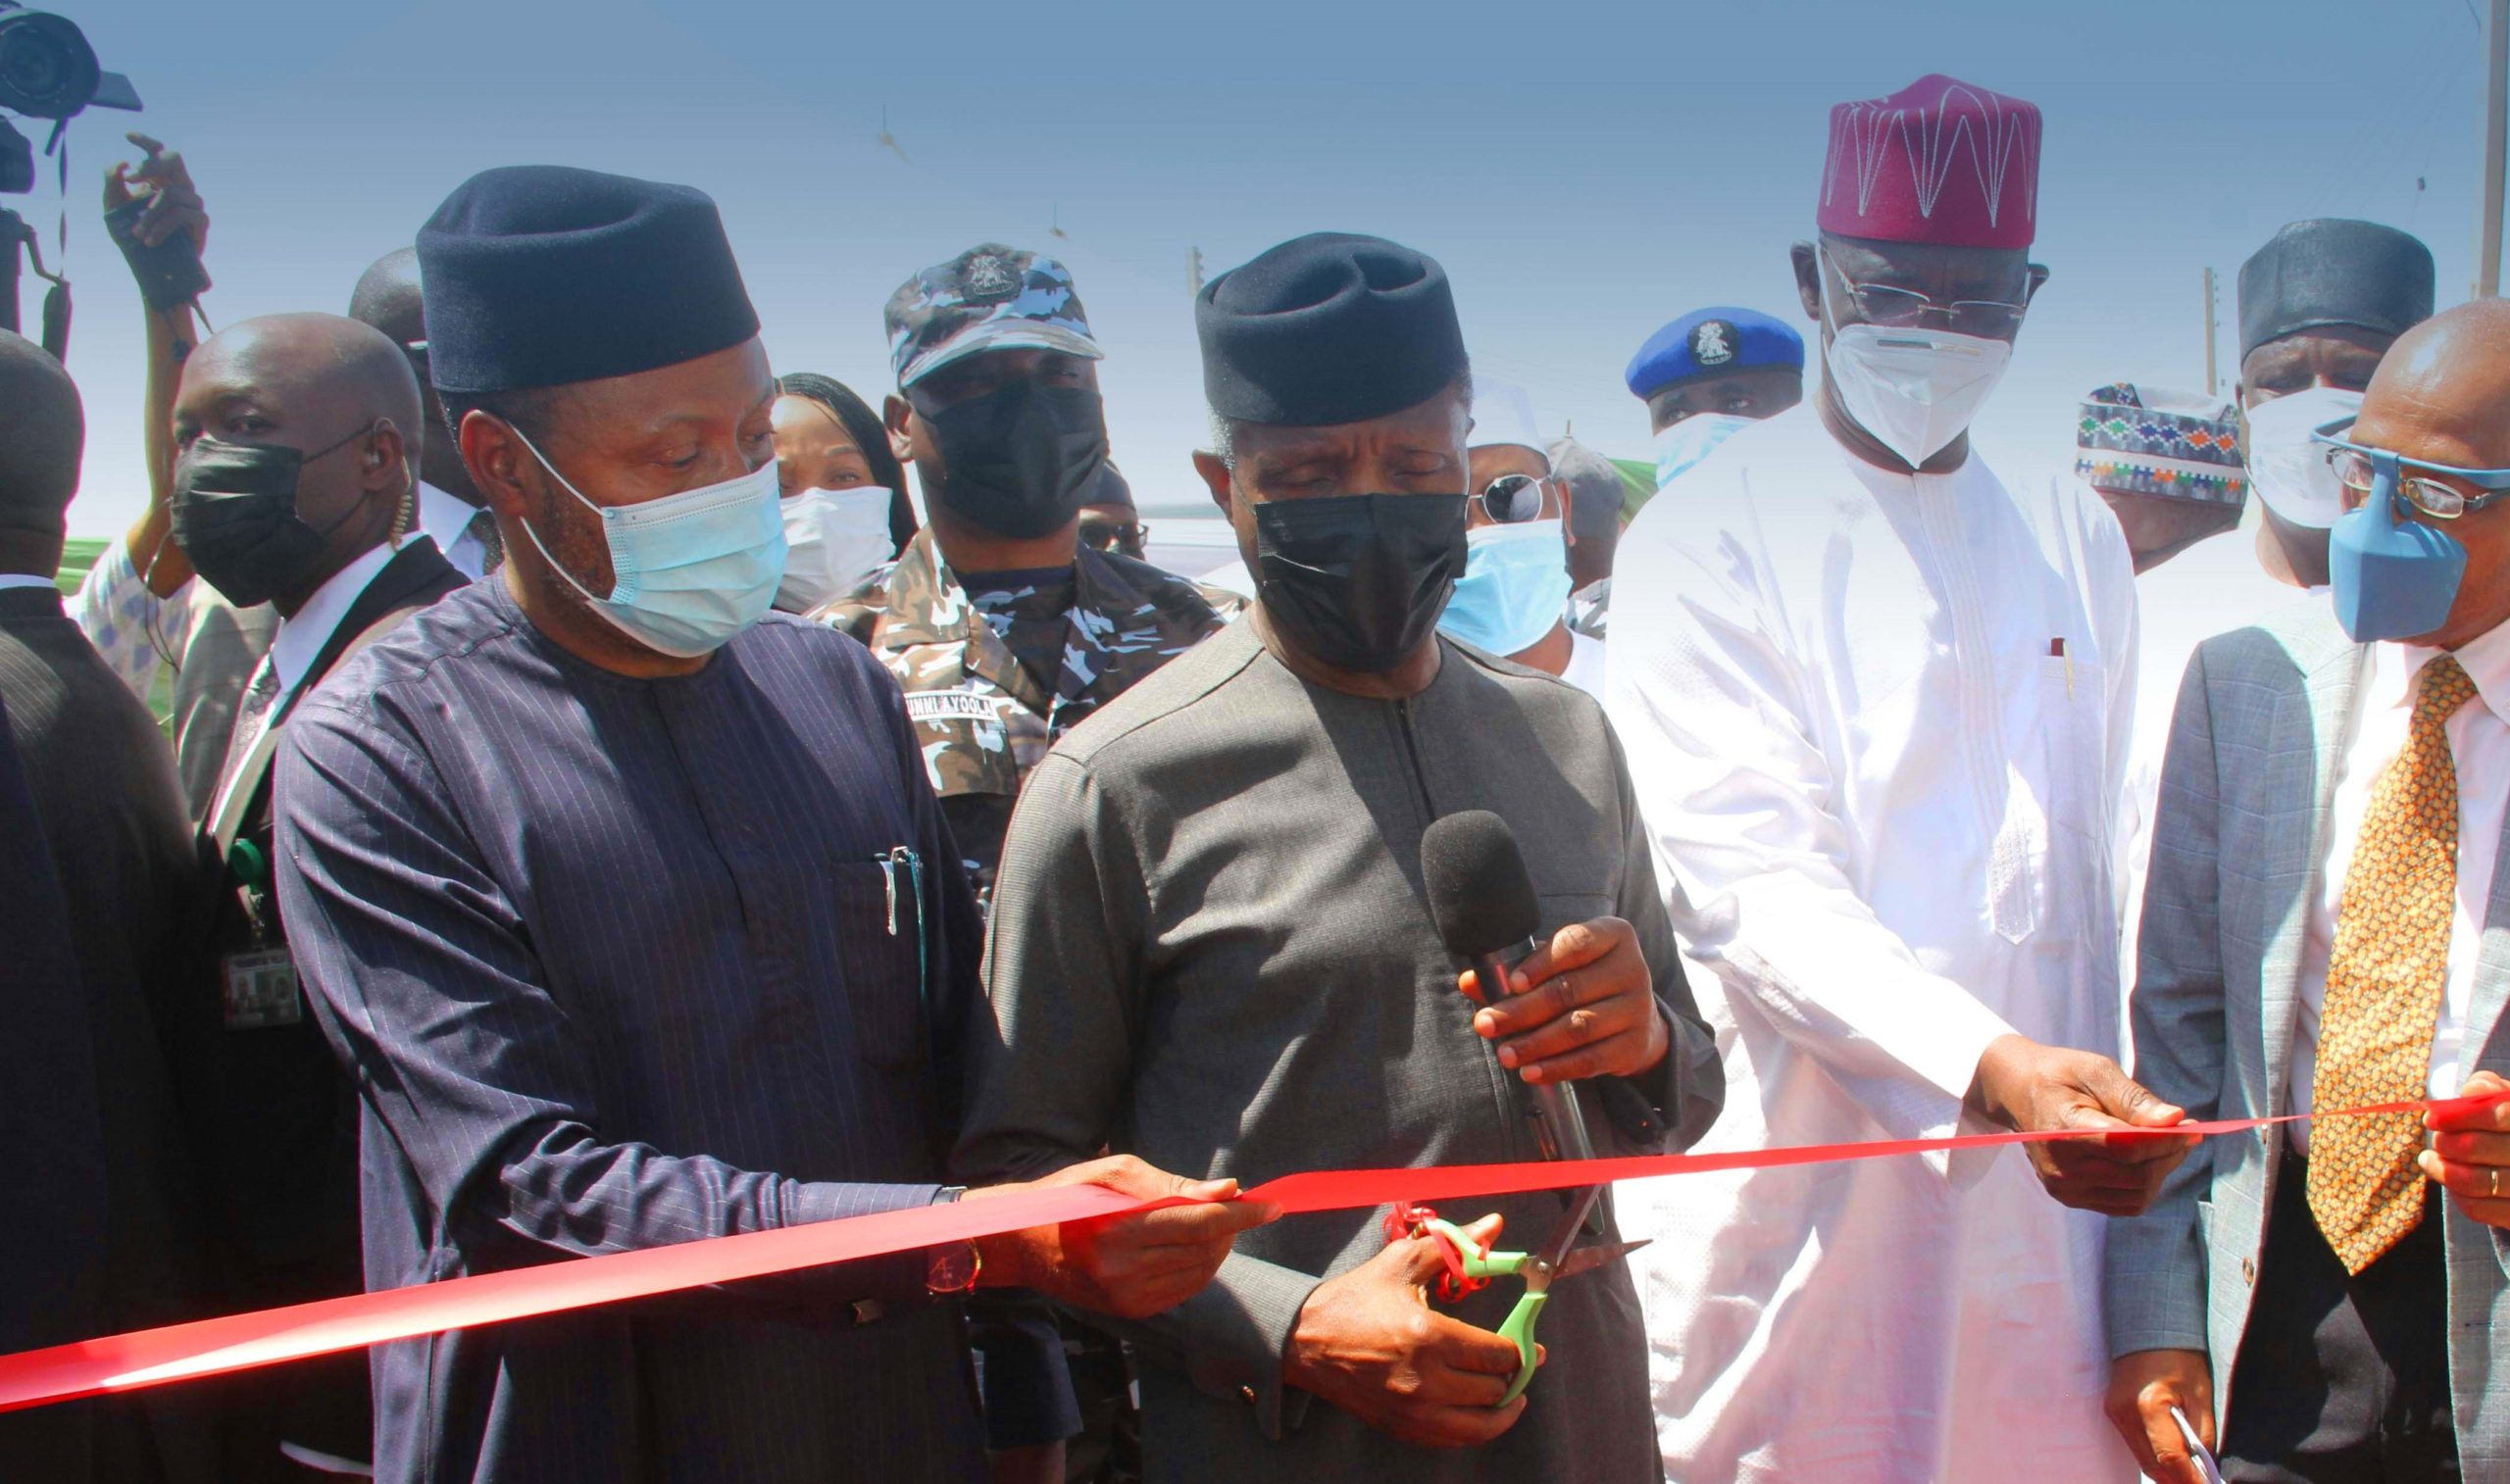 Vice-President of Nigeria visits Reall’s affordable homes in Abuja